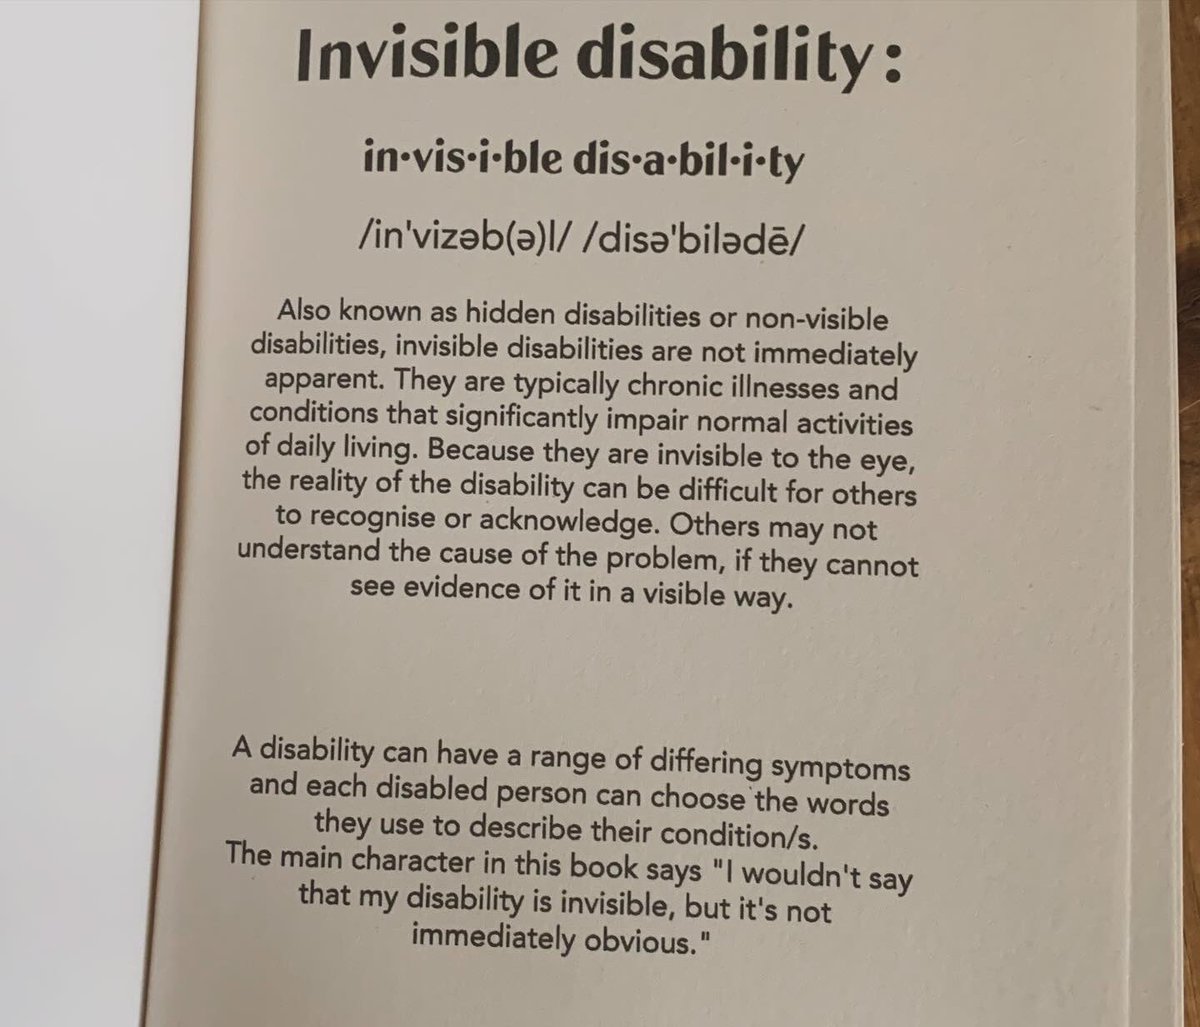 Thank you @Christina_Dem for sending me this proof of #AlterEgo - I’m really looking forward to reading it. #invisibleillness #invisibledisability #amreading